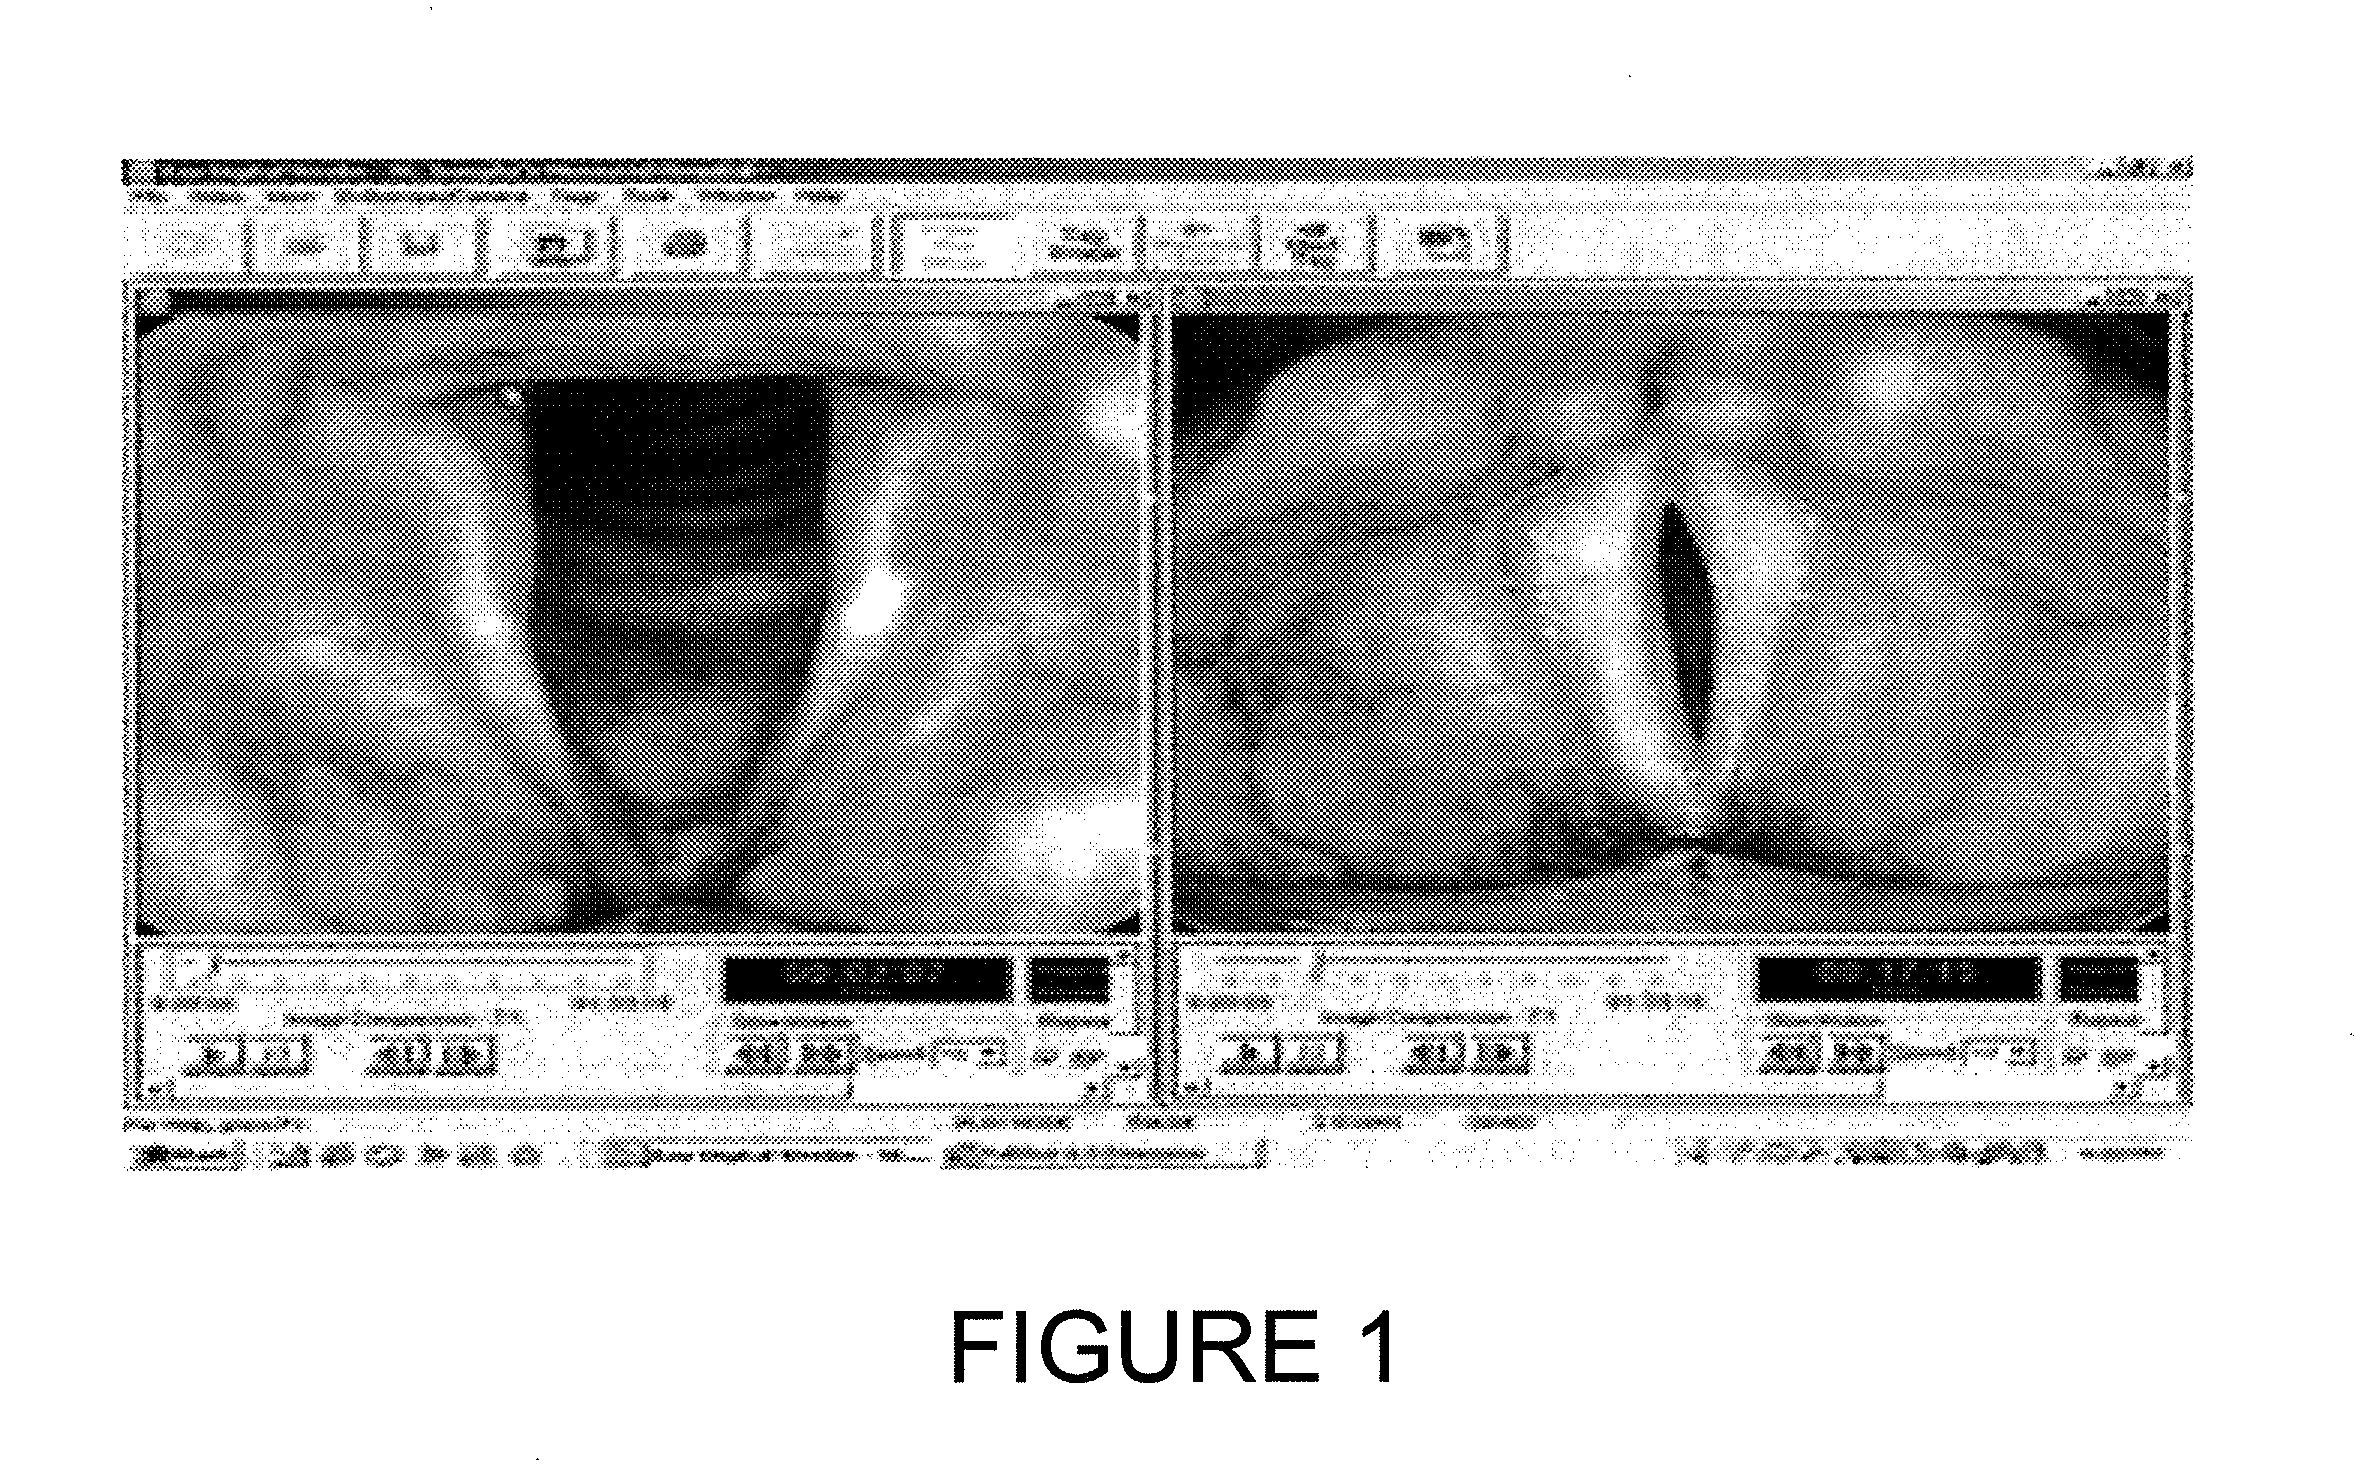 Methods and arrangements for analysis, diagnosis, and treatment monitoring of vocal folds by optical coherence tomography